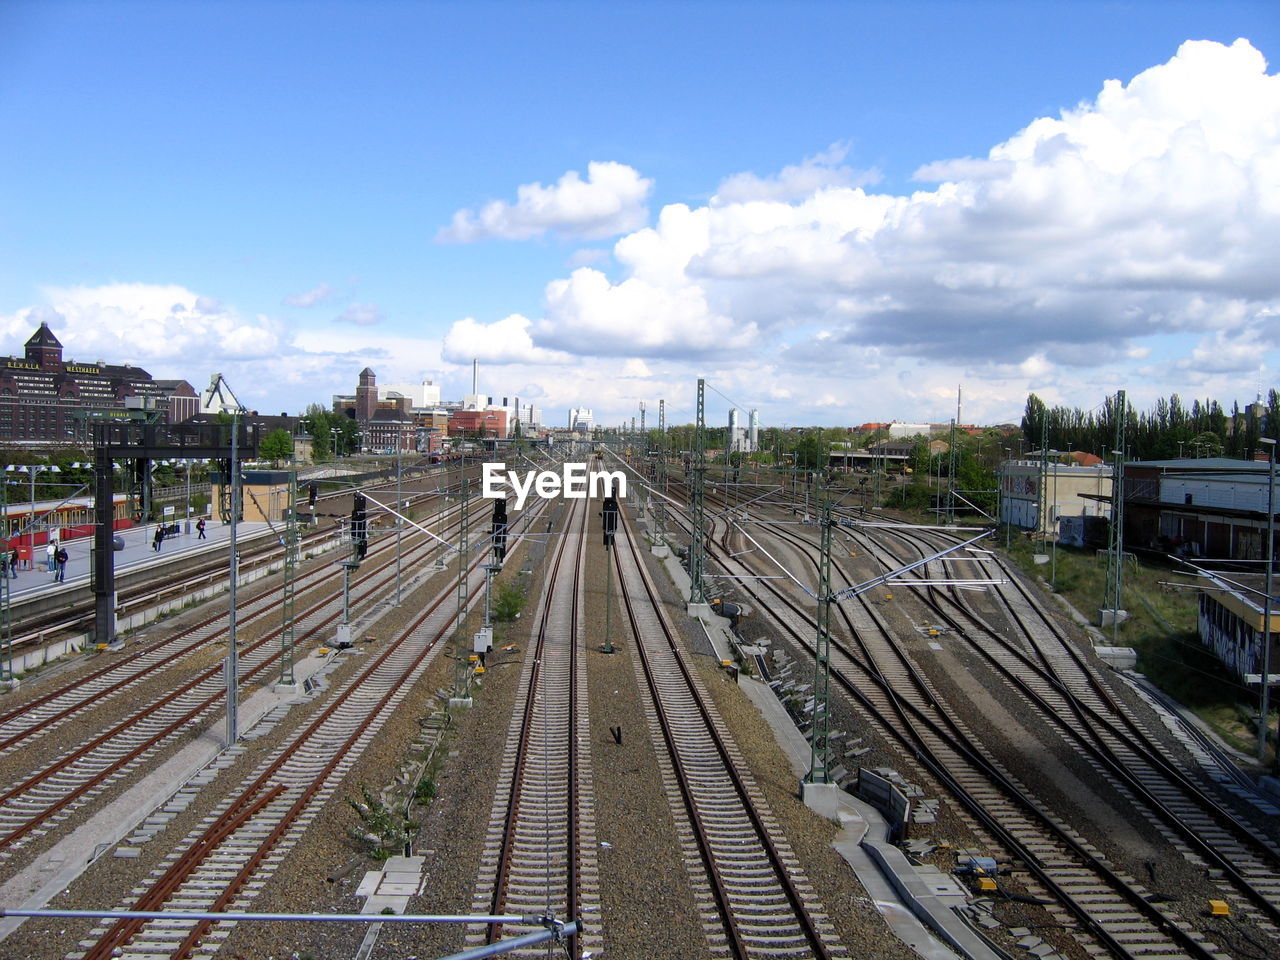 High angle view of railway tracks against cloudy sky